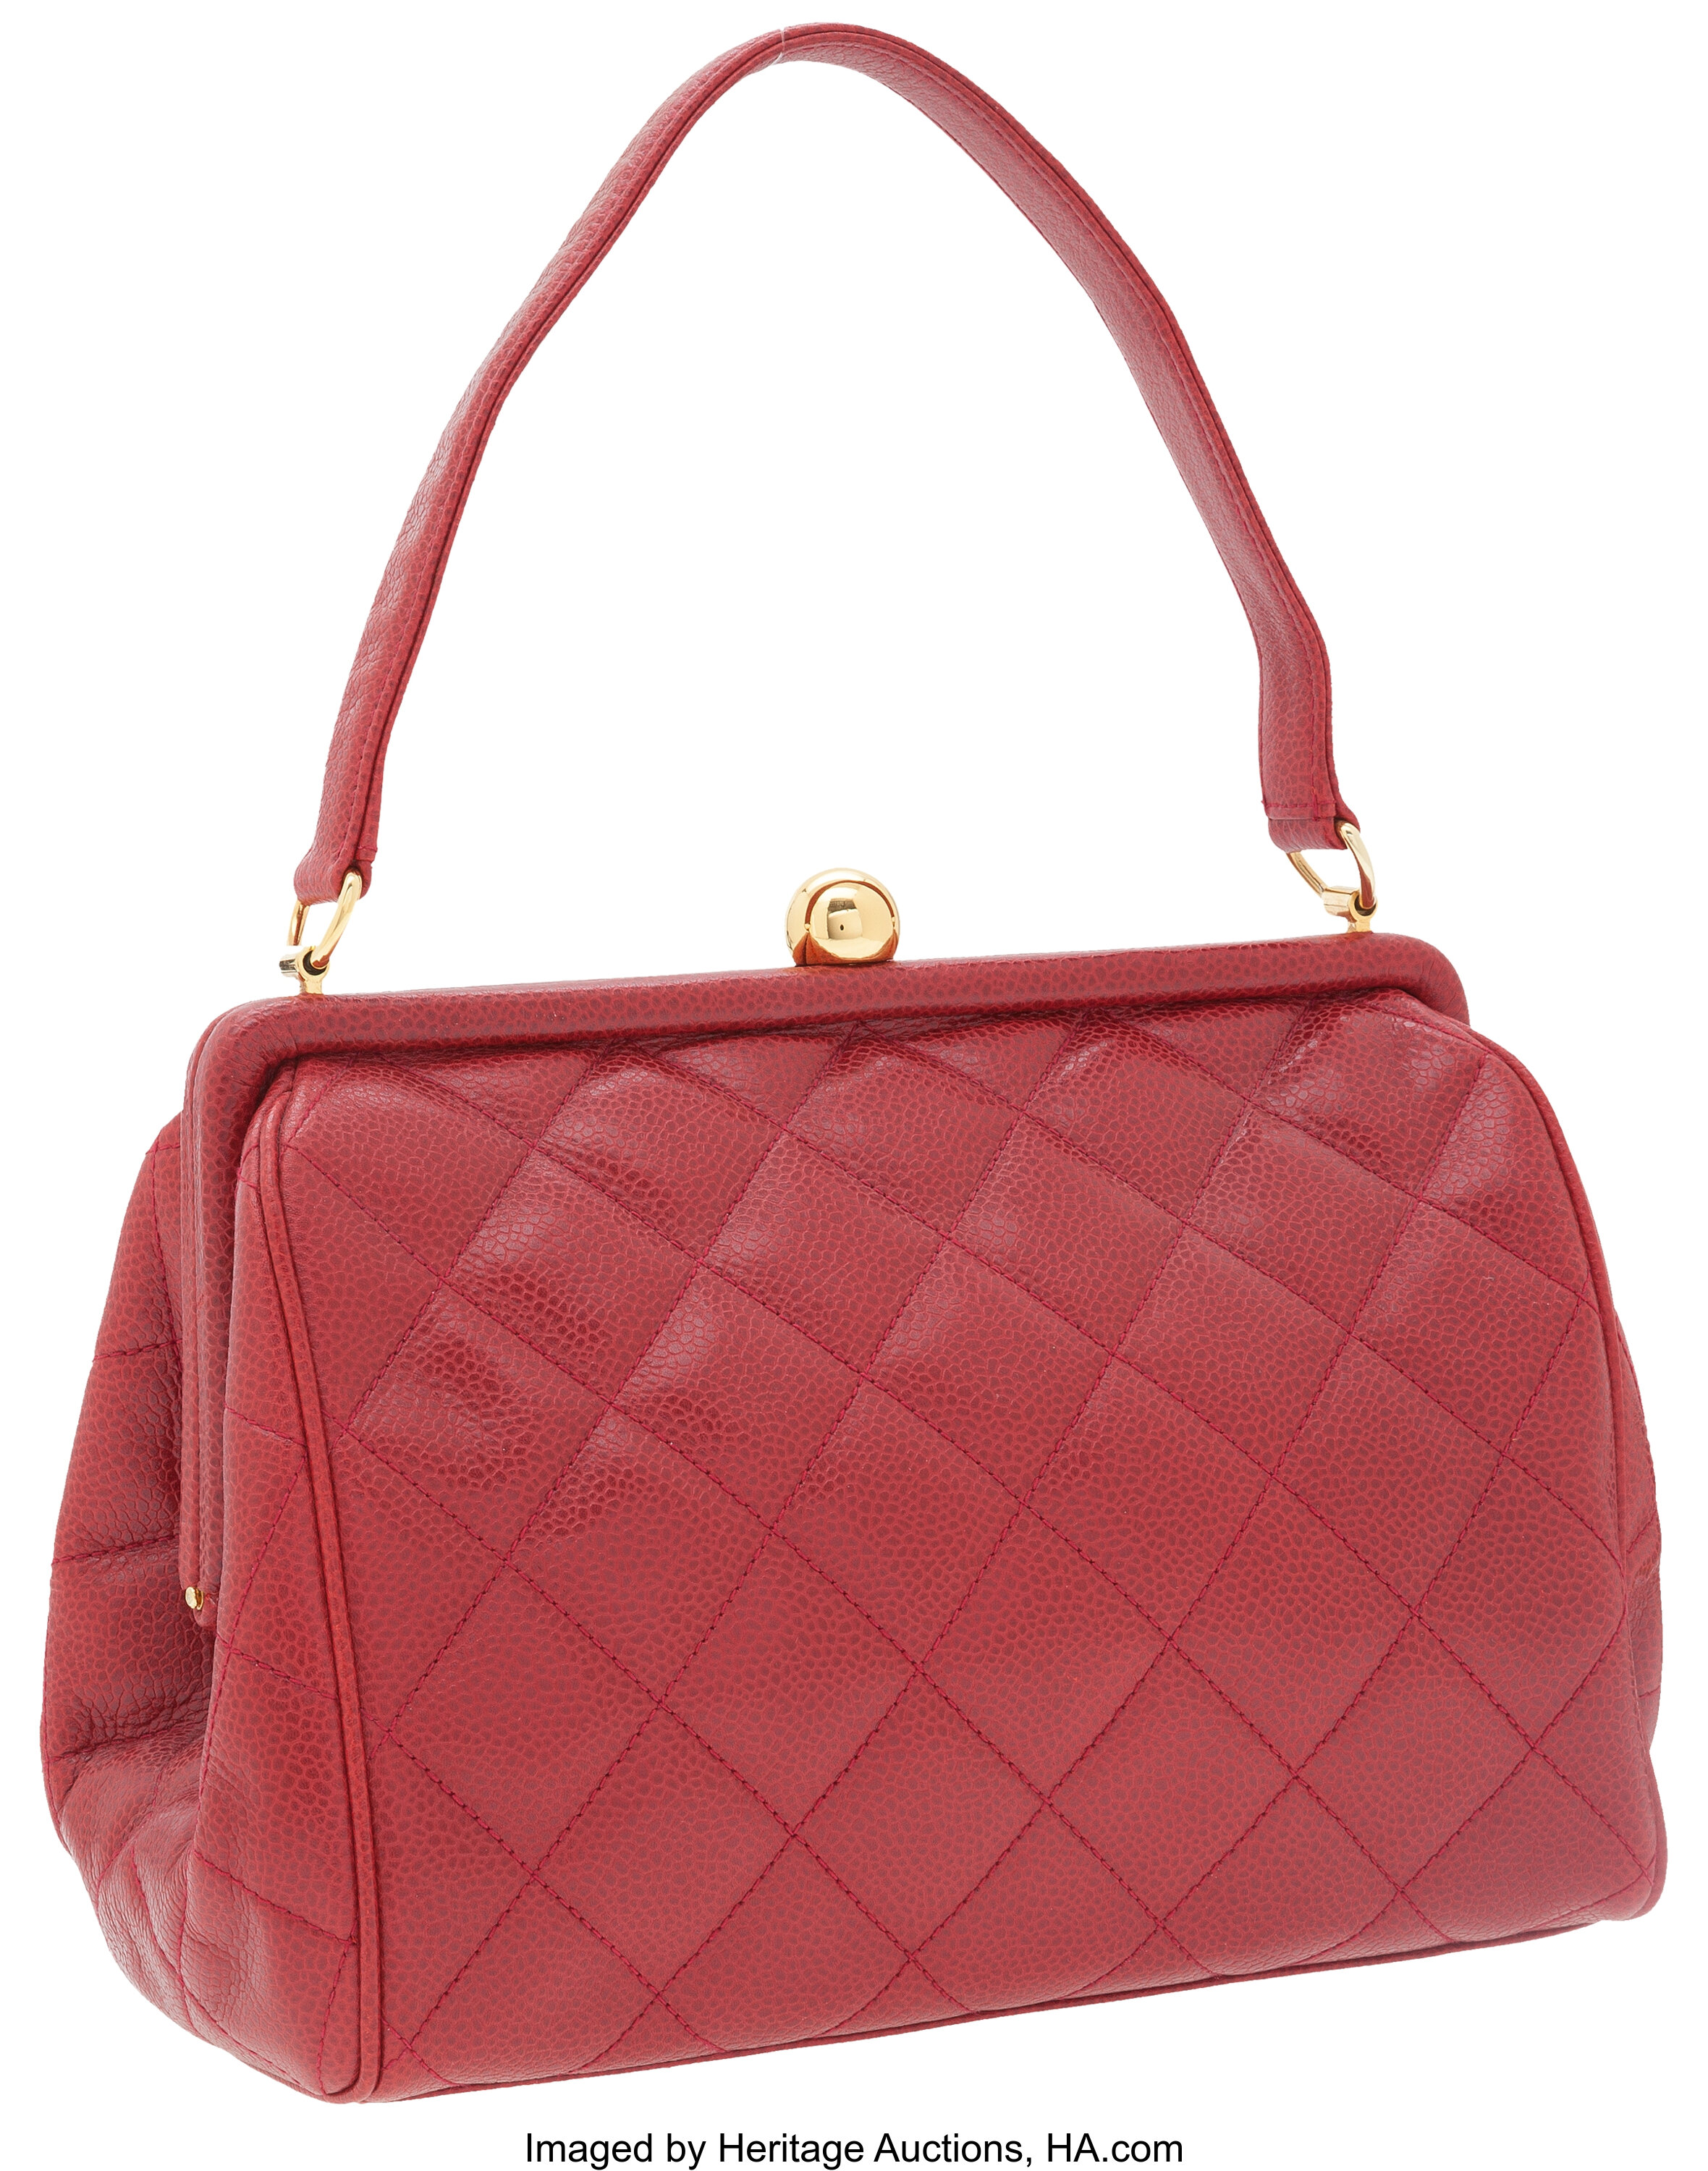 Chanel Red Caviar Quilted Leather Bag with Kisslock Closure. , Lot  #76013